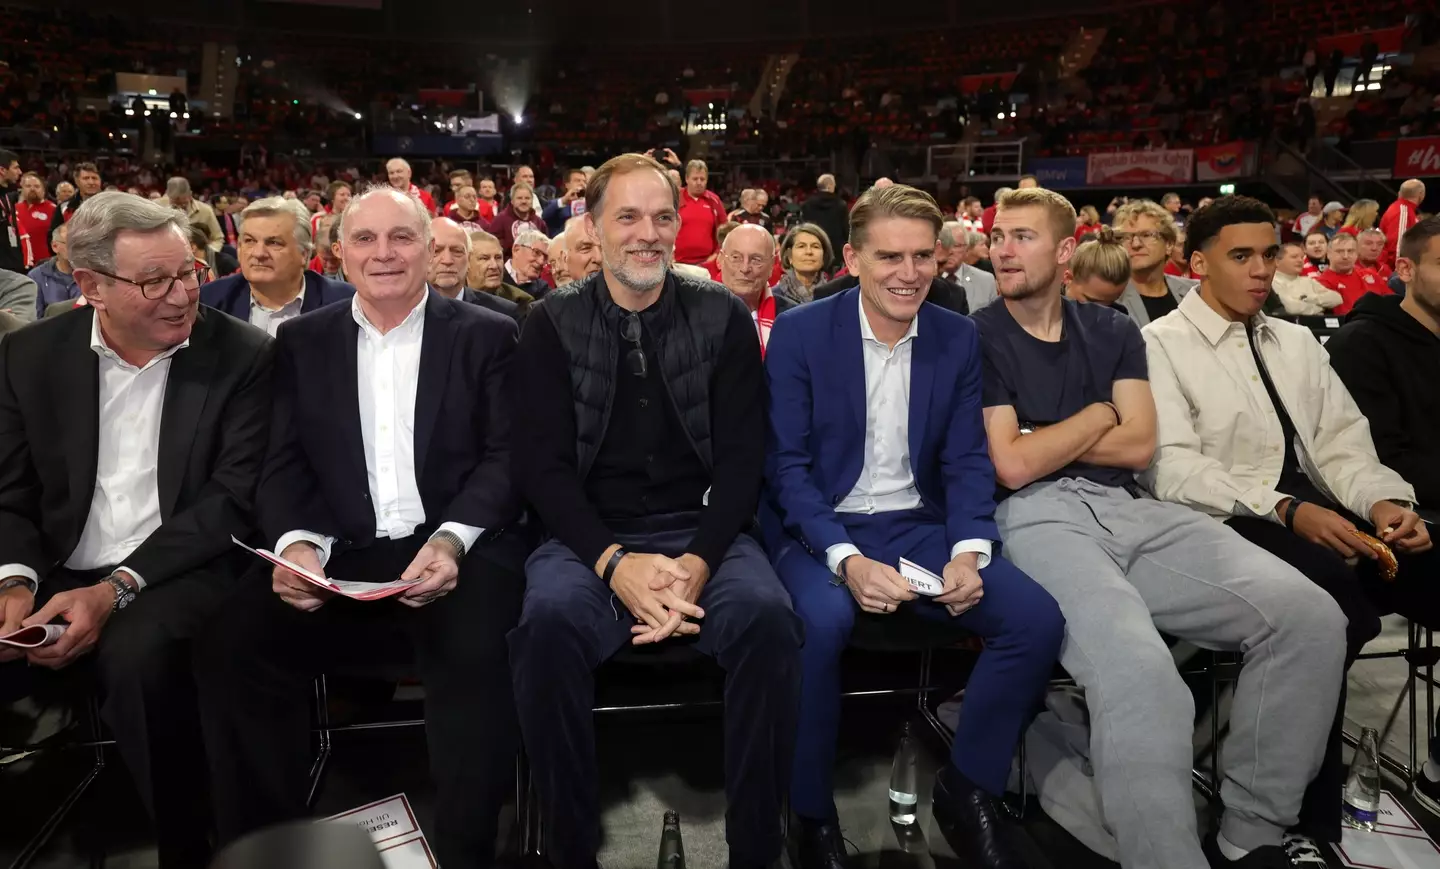 Tuchel in attendance at the AGM. (Image